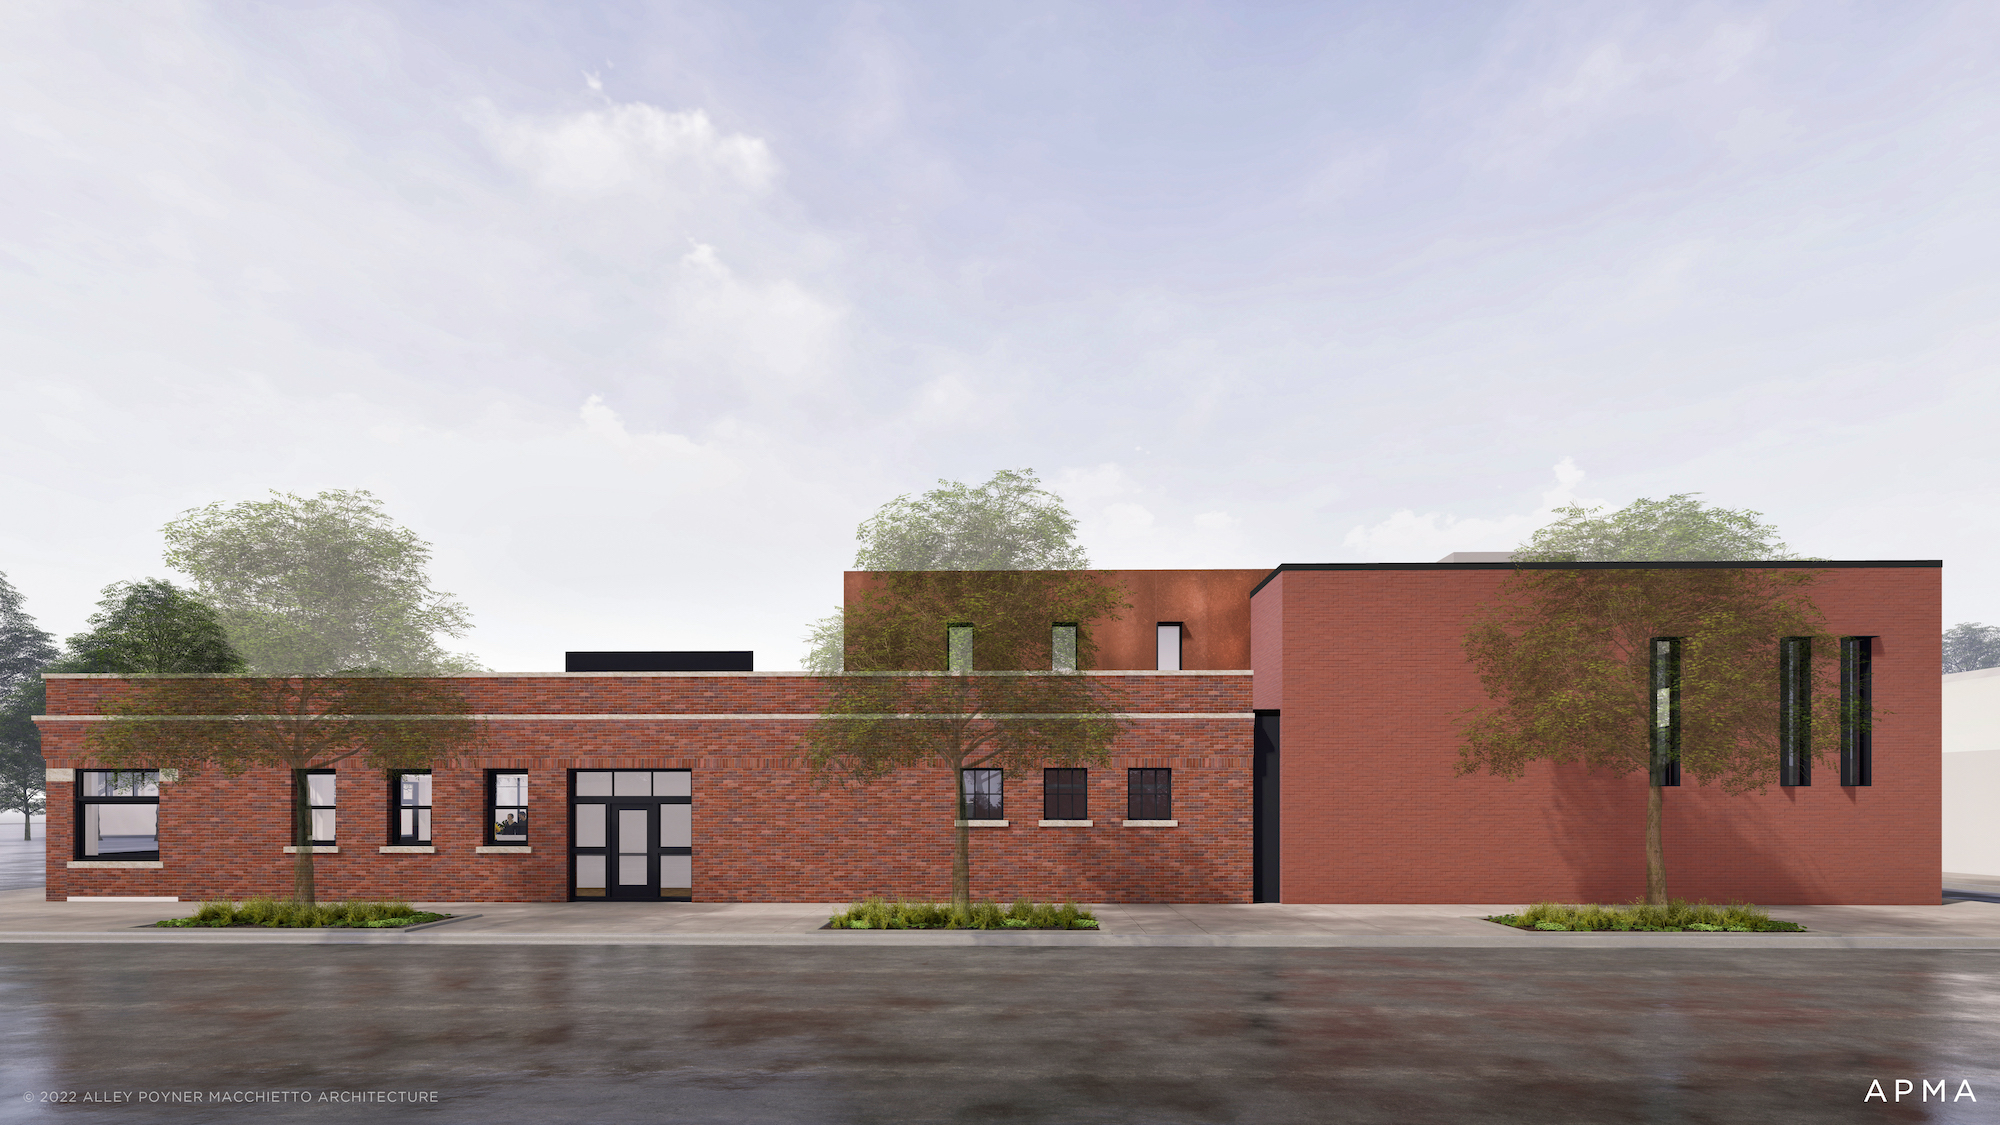 Union theater rendering south wall Red brick with trees in the foreground